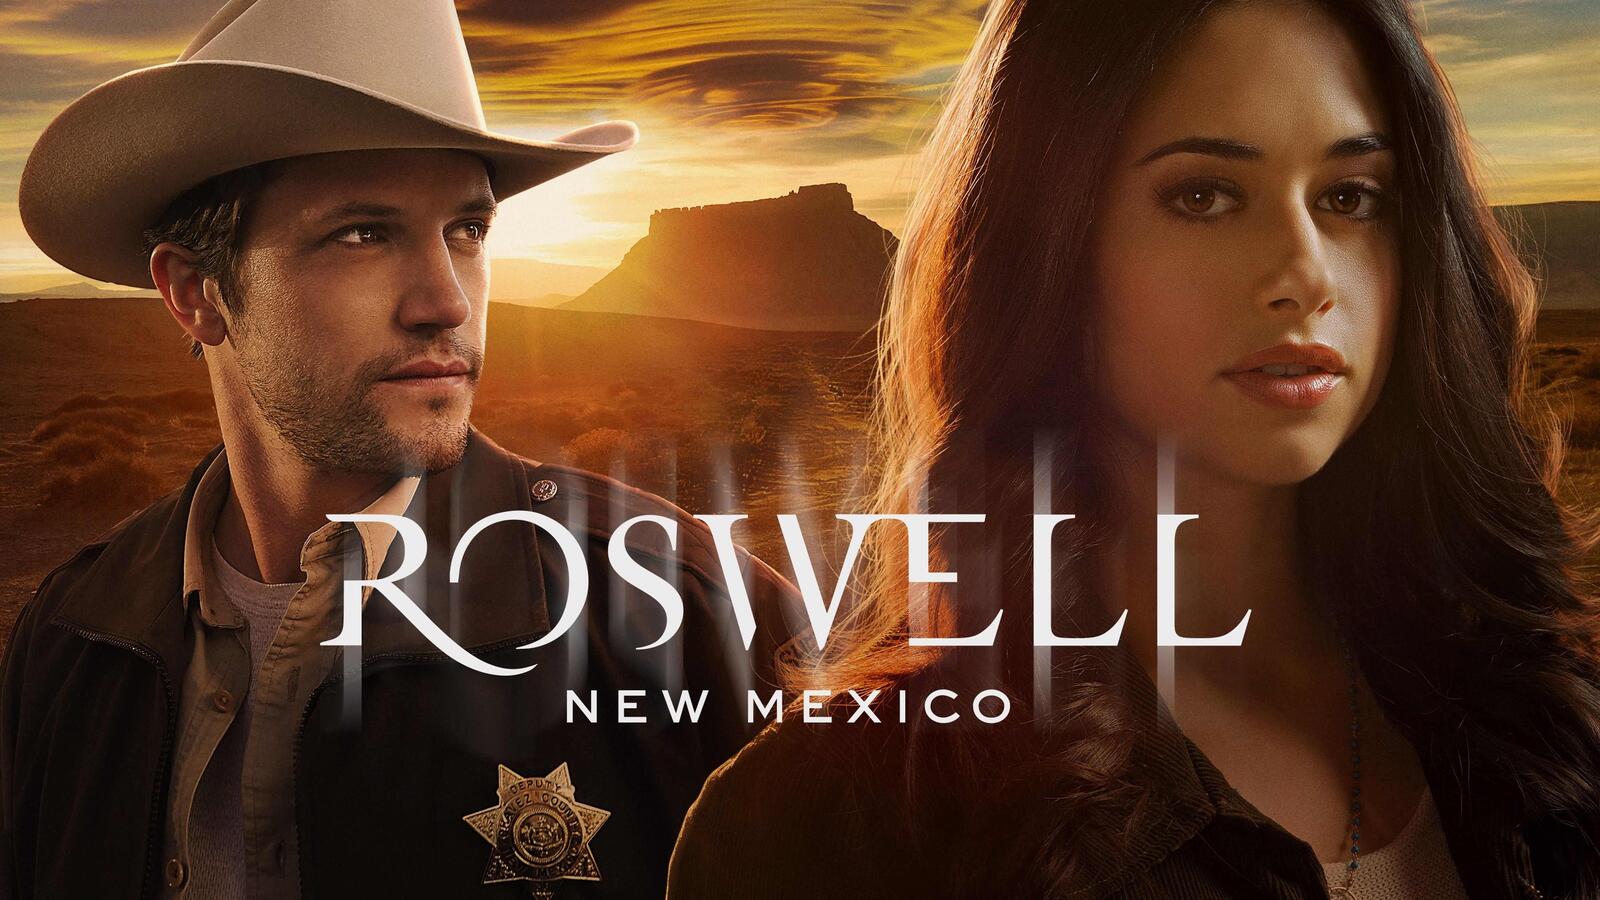 Wallpapers TV show roswell new mexico jeanine mason on the desktop